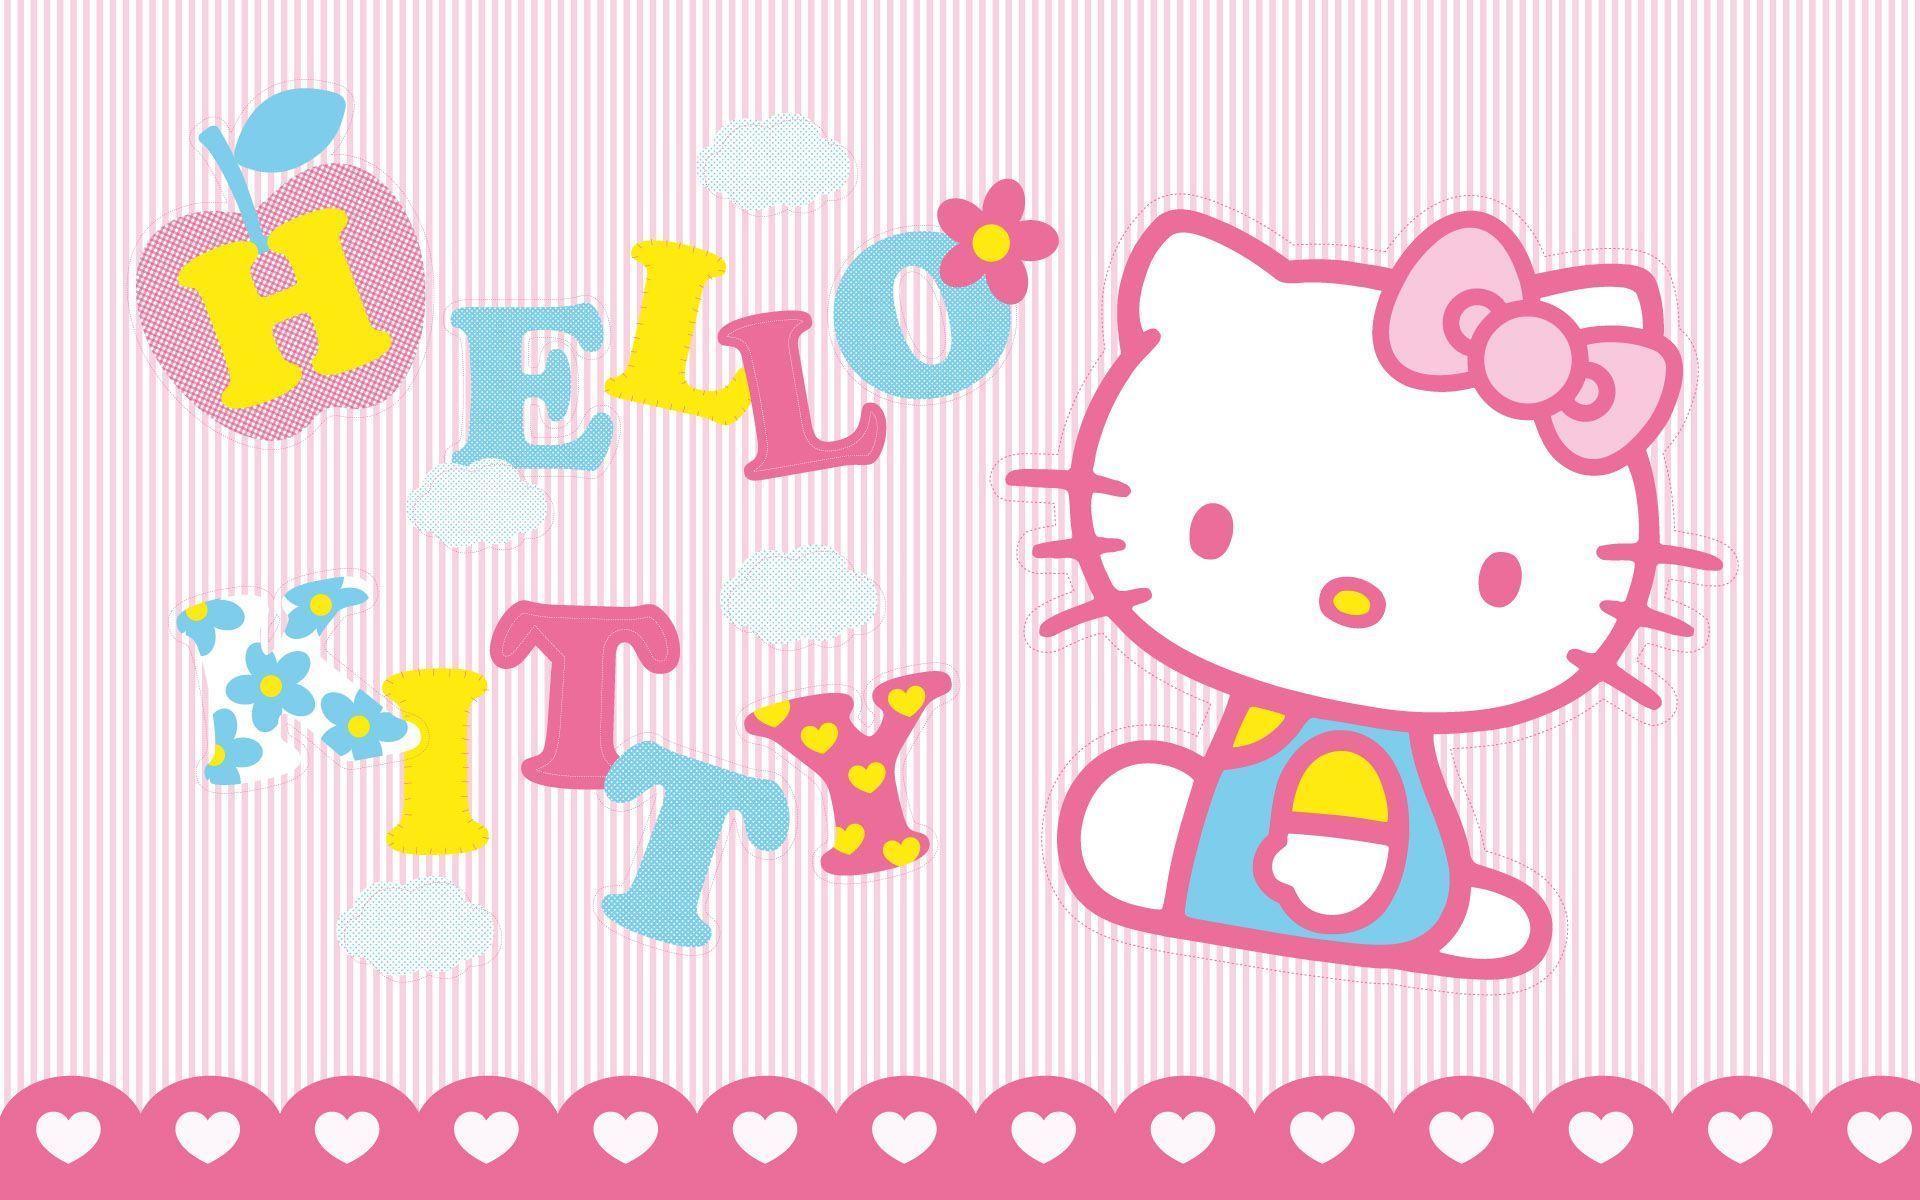 Wallpaper For > Simple Pink Hello Kitty Background